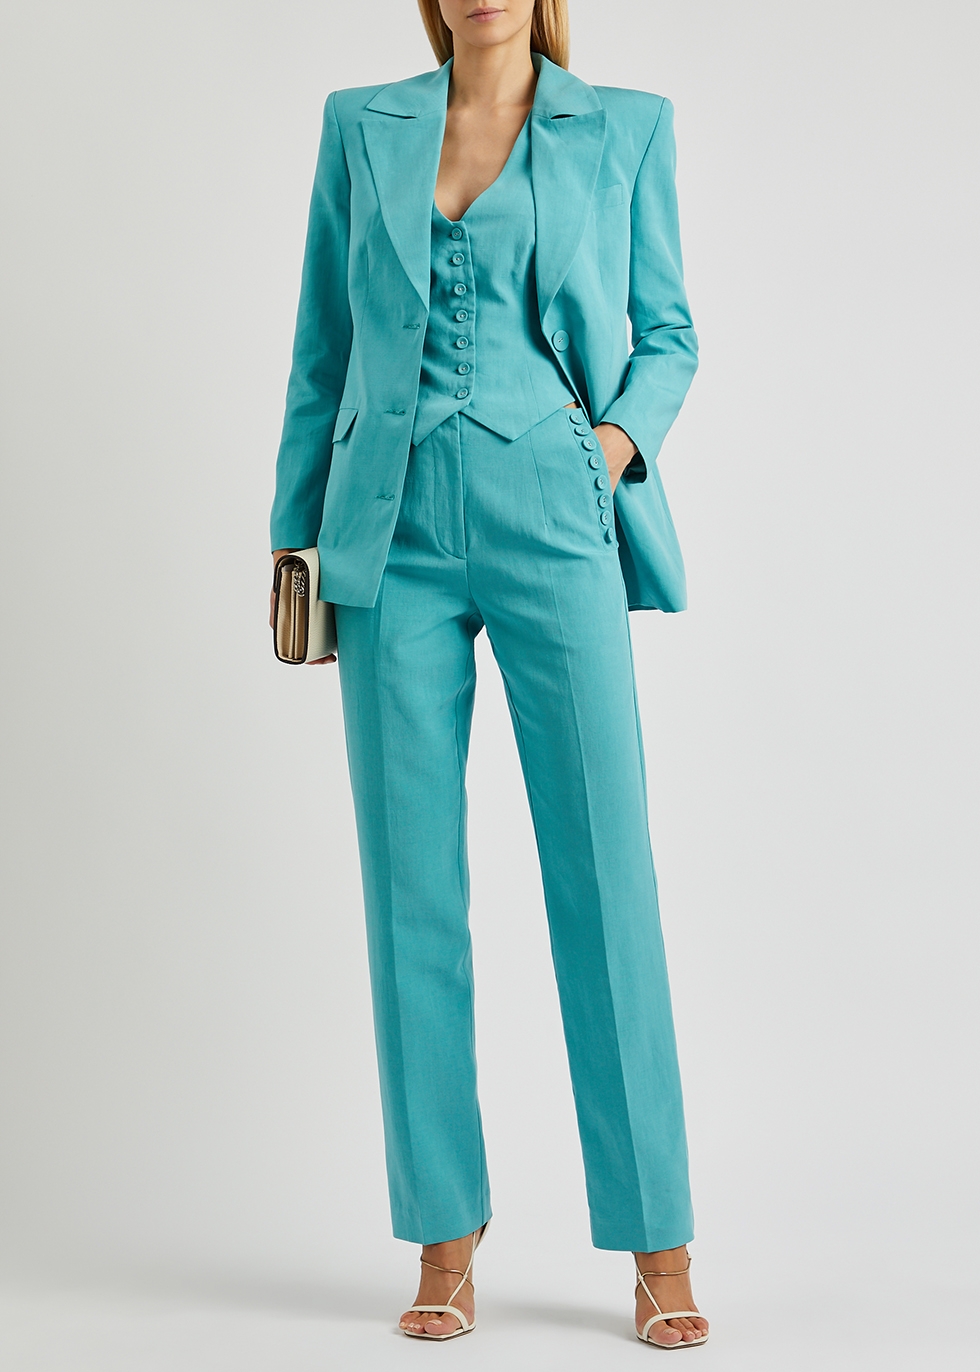 Green Womens Clothing Suits Skirt suits Boohoo Synthetic Slim Jacquard Suit Trouser in Teal 